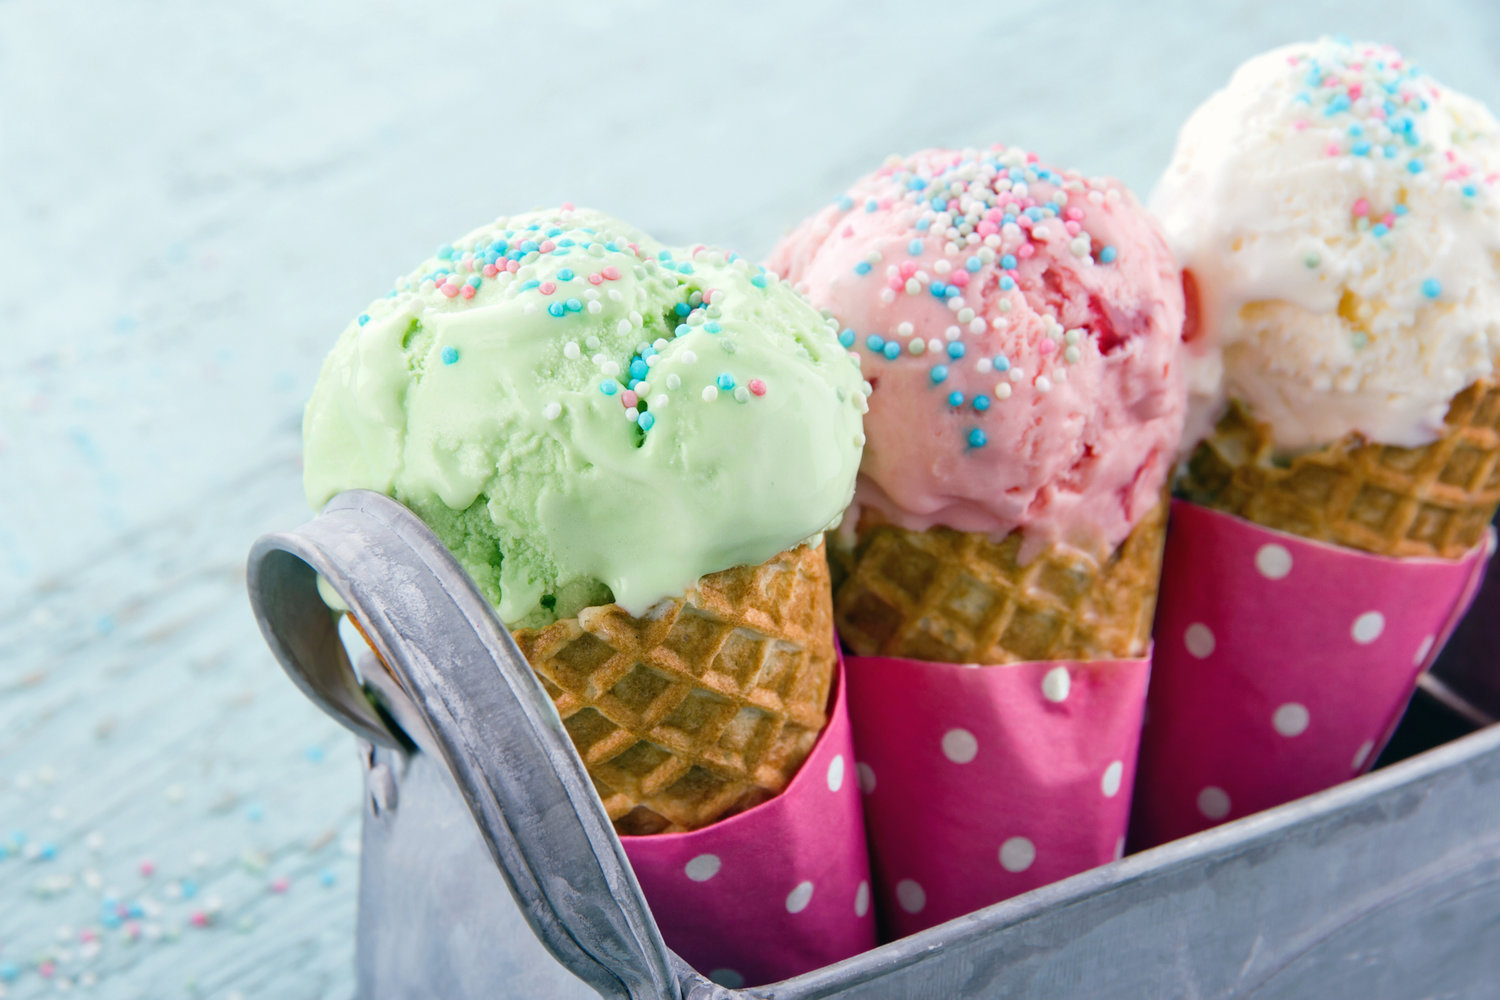 Wholesale Ice Cream: Buying in Bulk for Business or Events